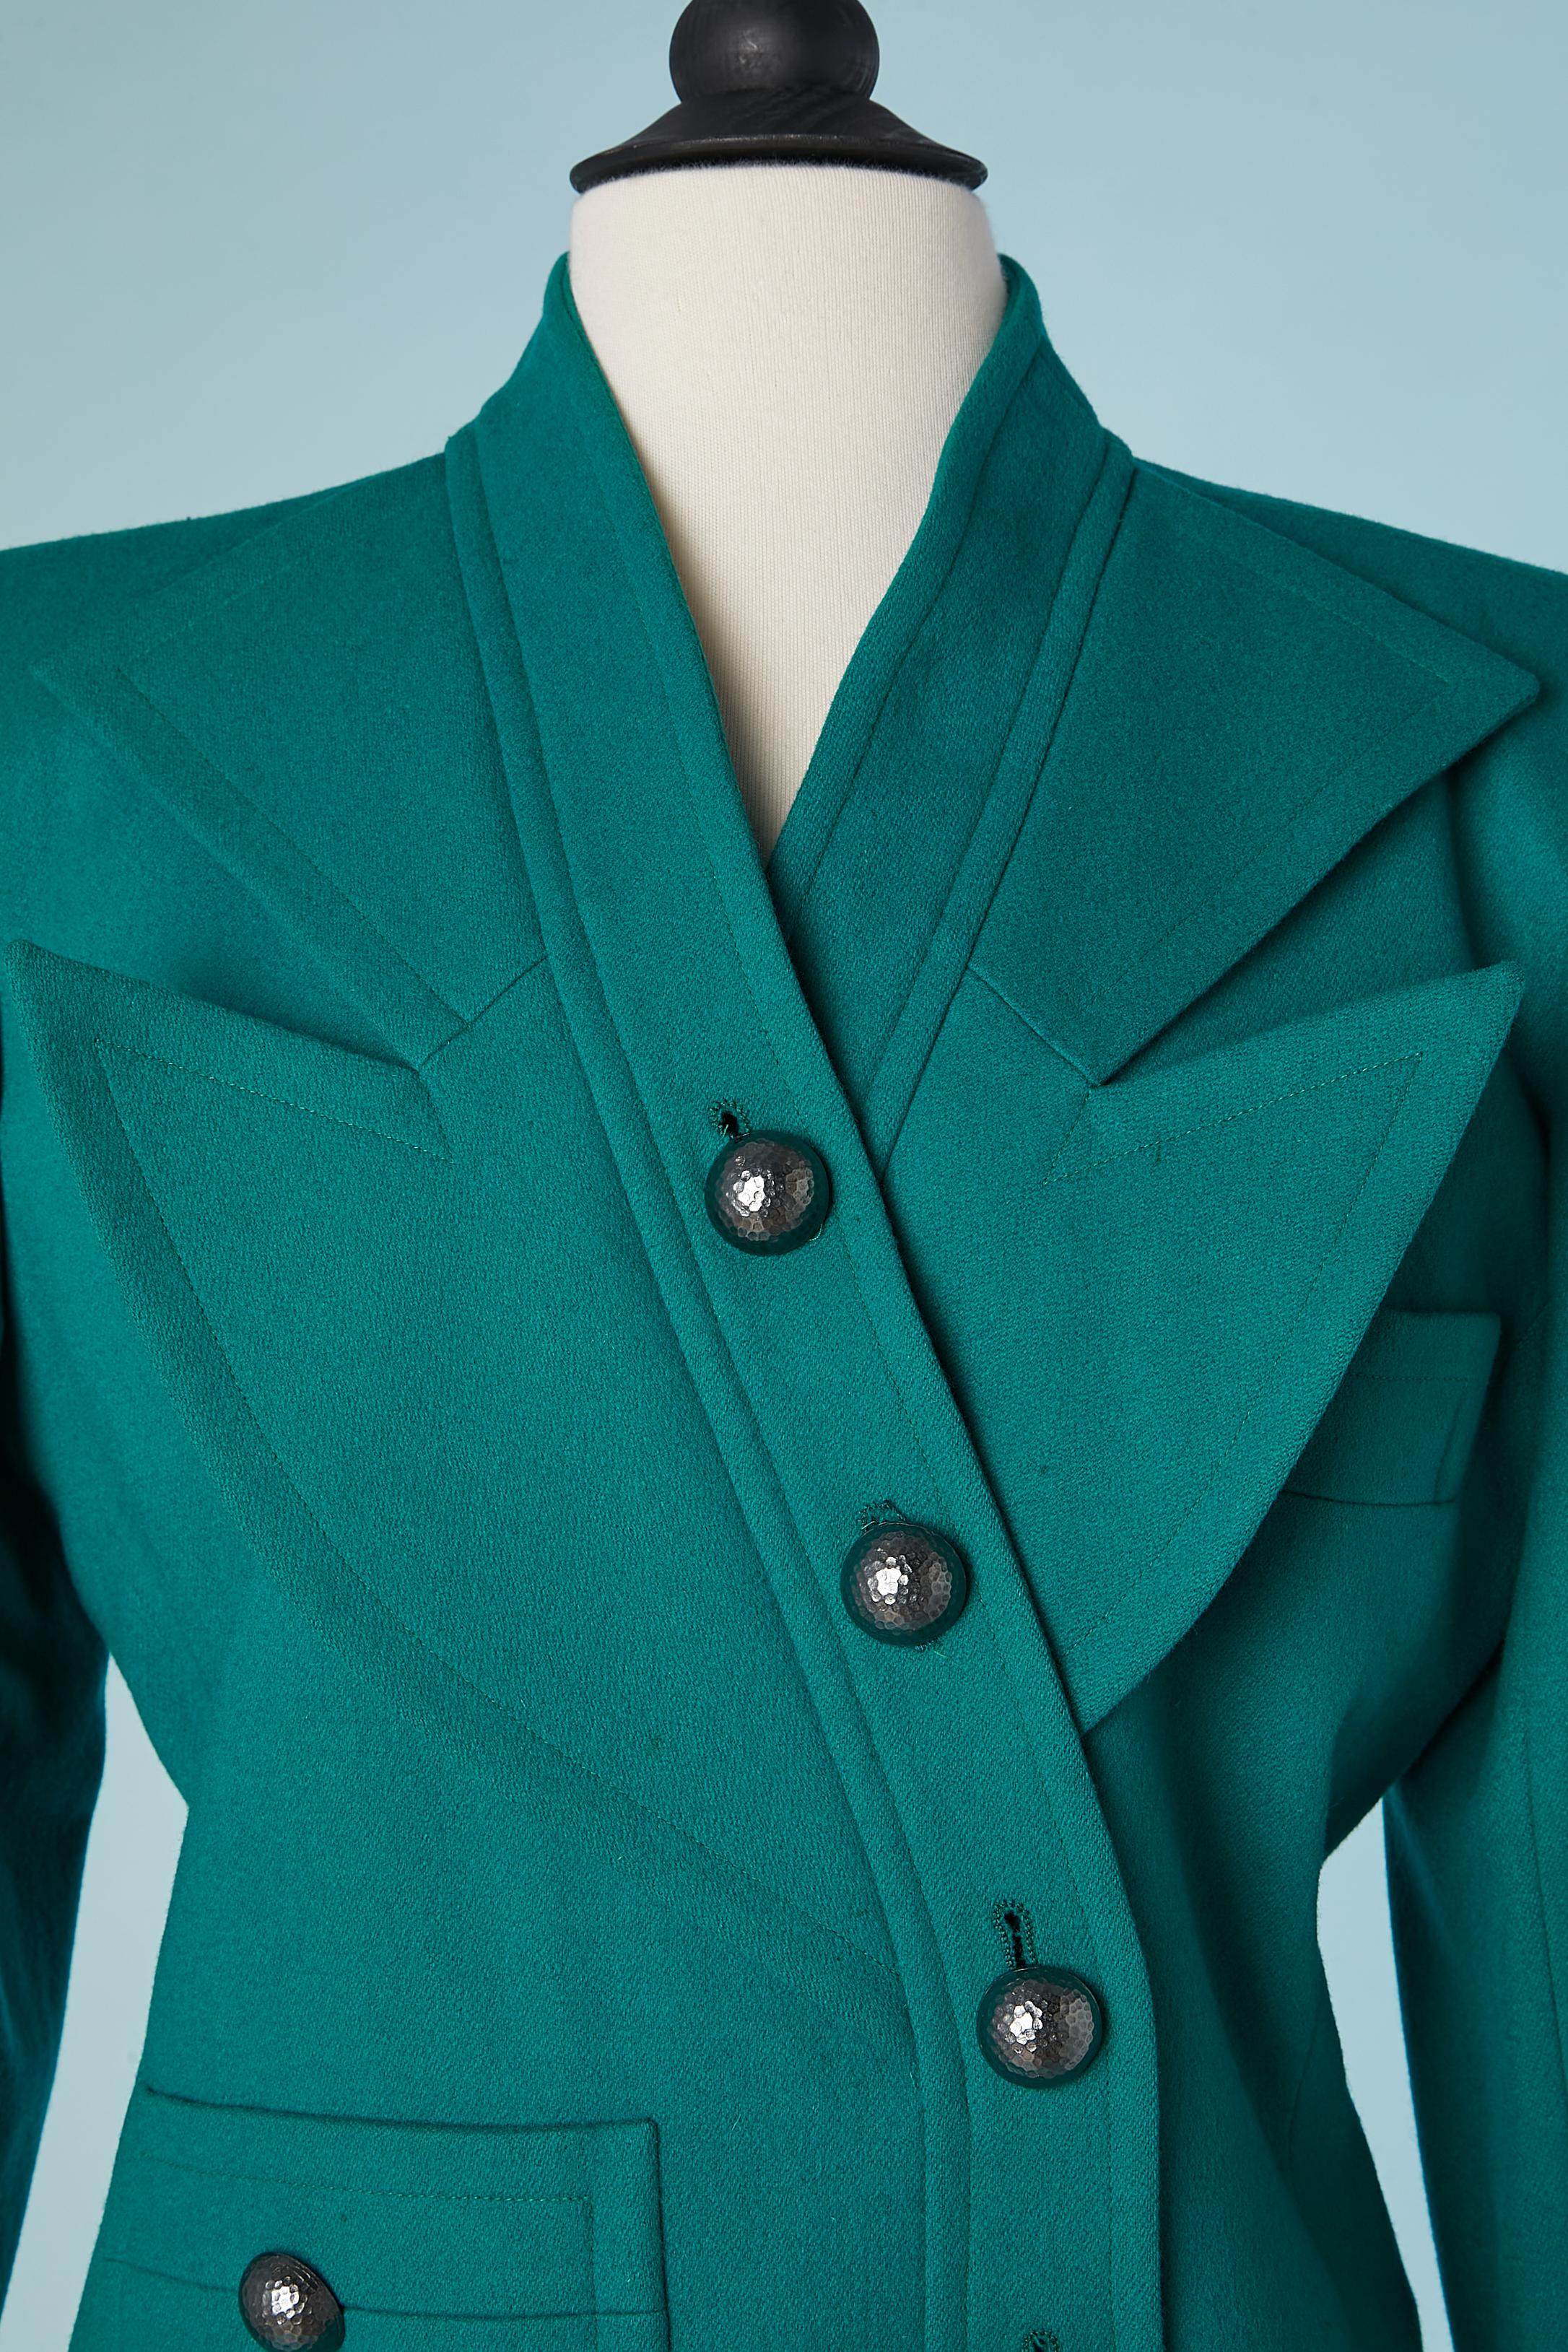 Green wool skirt-suit with graphic collar. Double-breasted jacket and hammered metal buttons. Shoulder-pad. Silk lining.
Size 38 ( jacket) and 40( skirt) 
